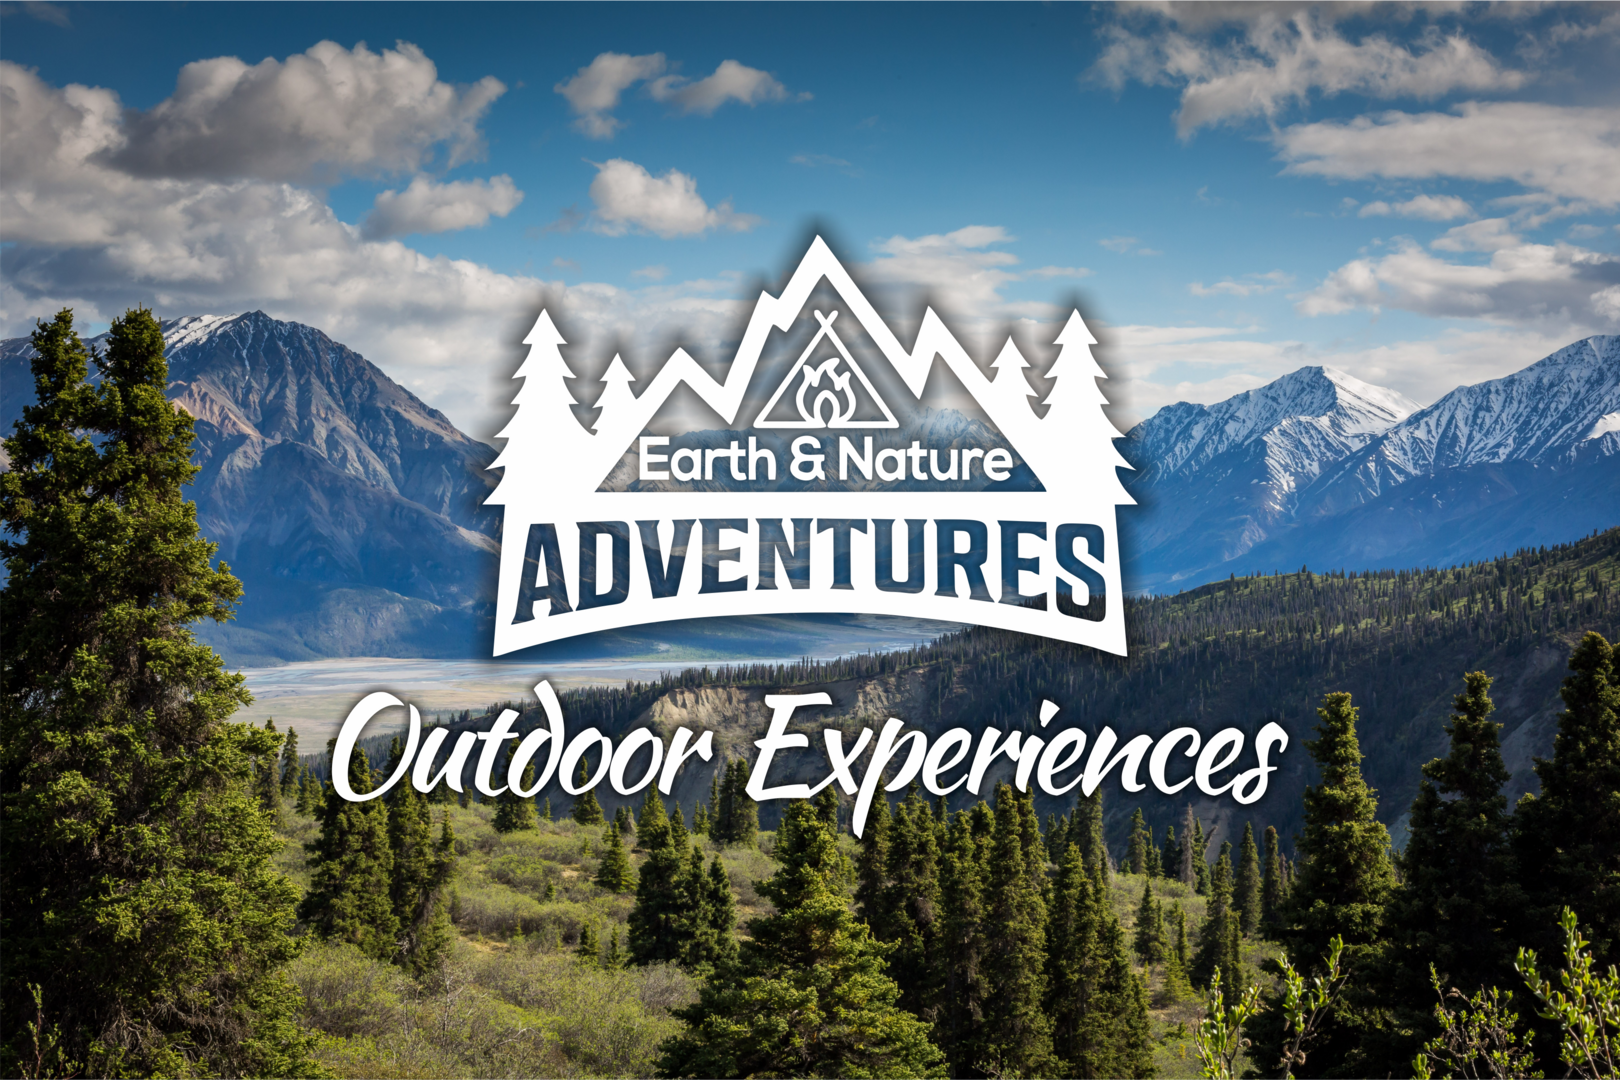 Outdoor Experiences, Earth & Nature Adventures